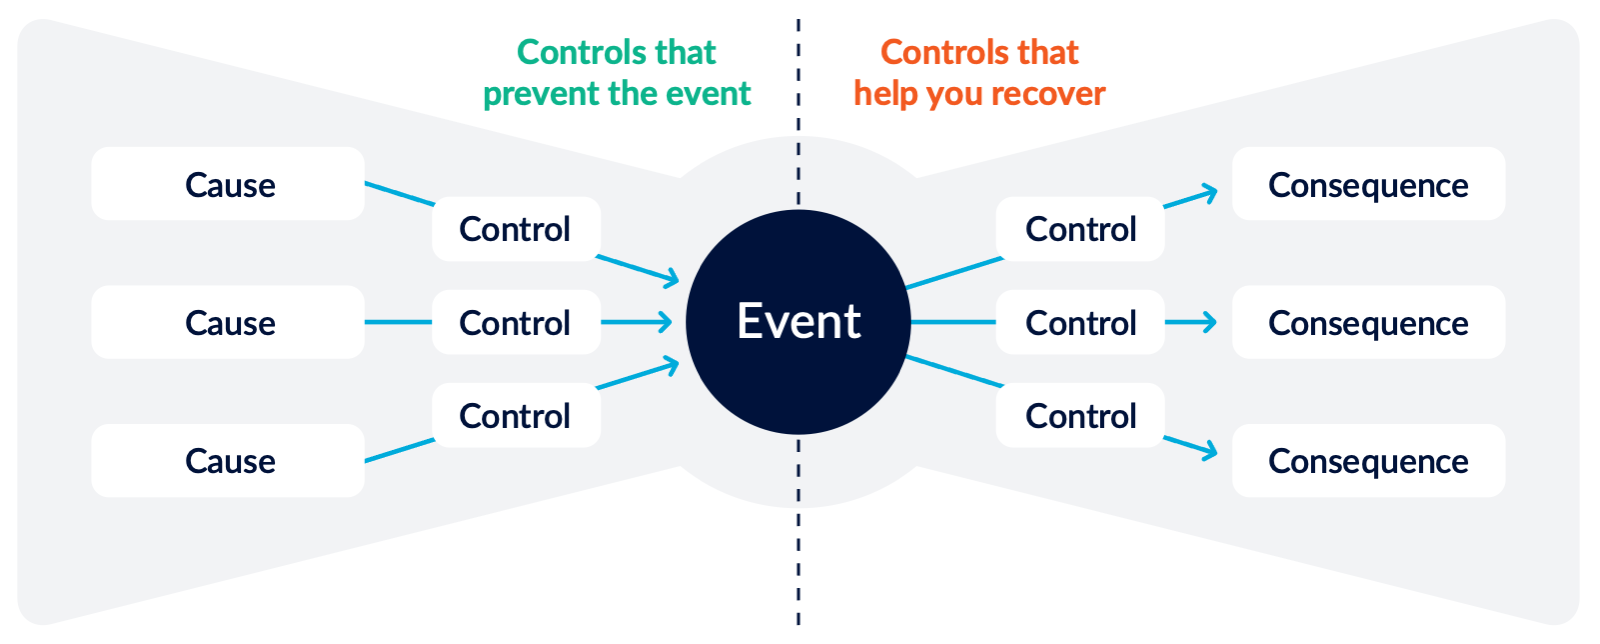 Controls that prevent the event and help you recover.